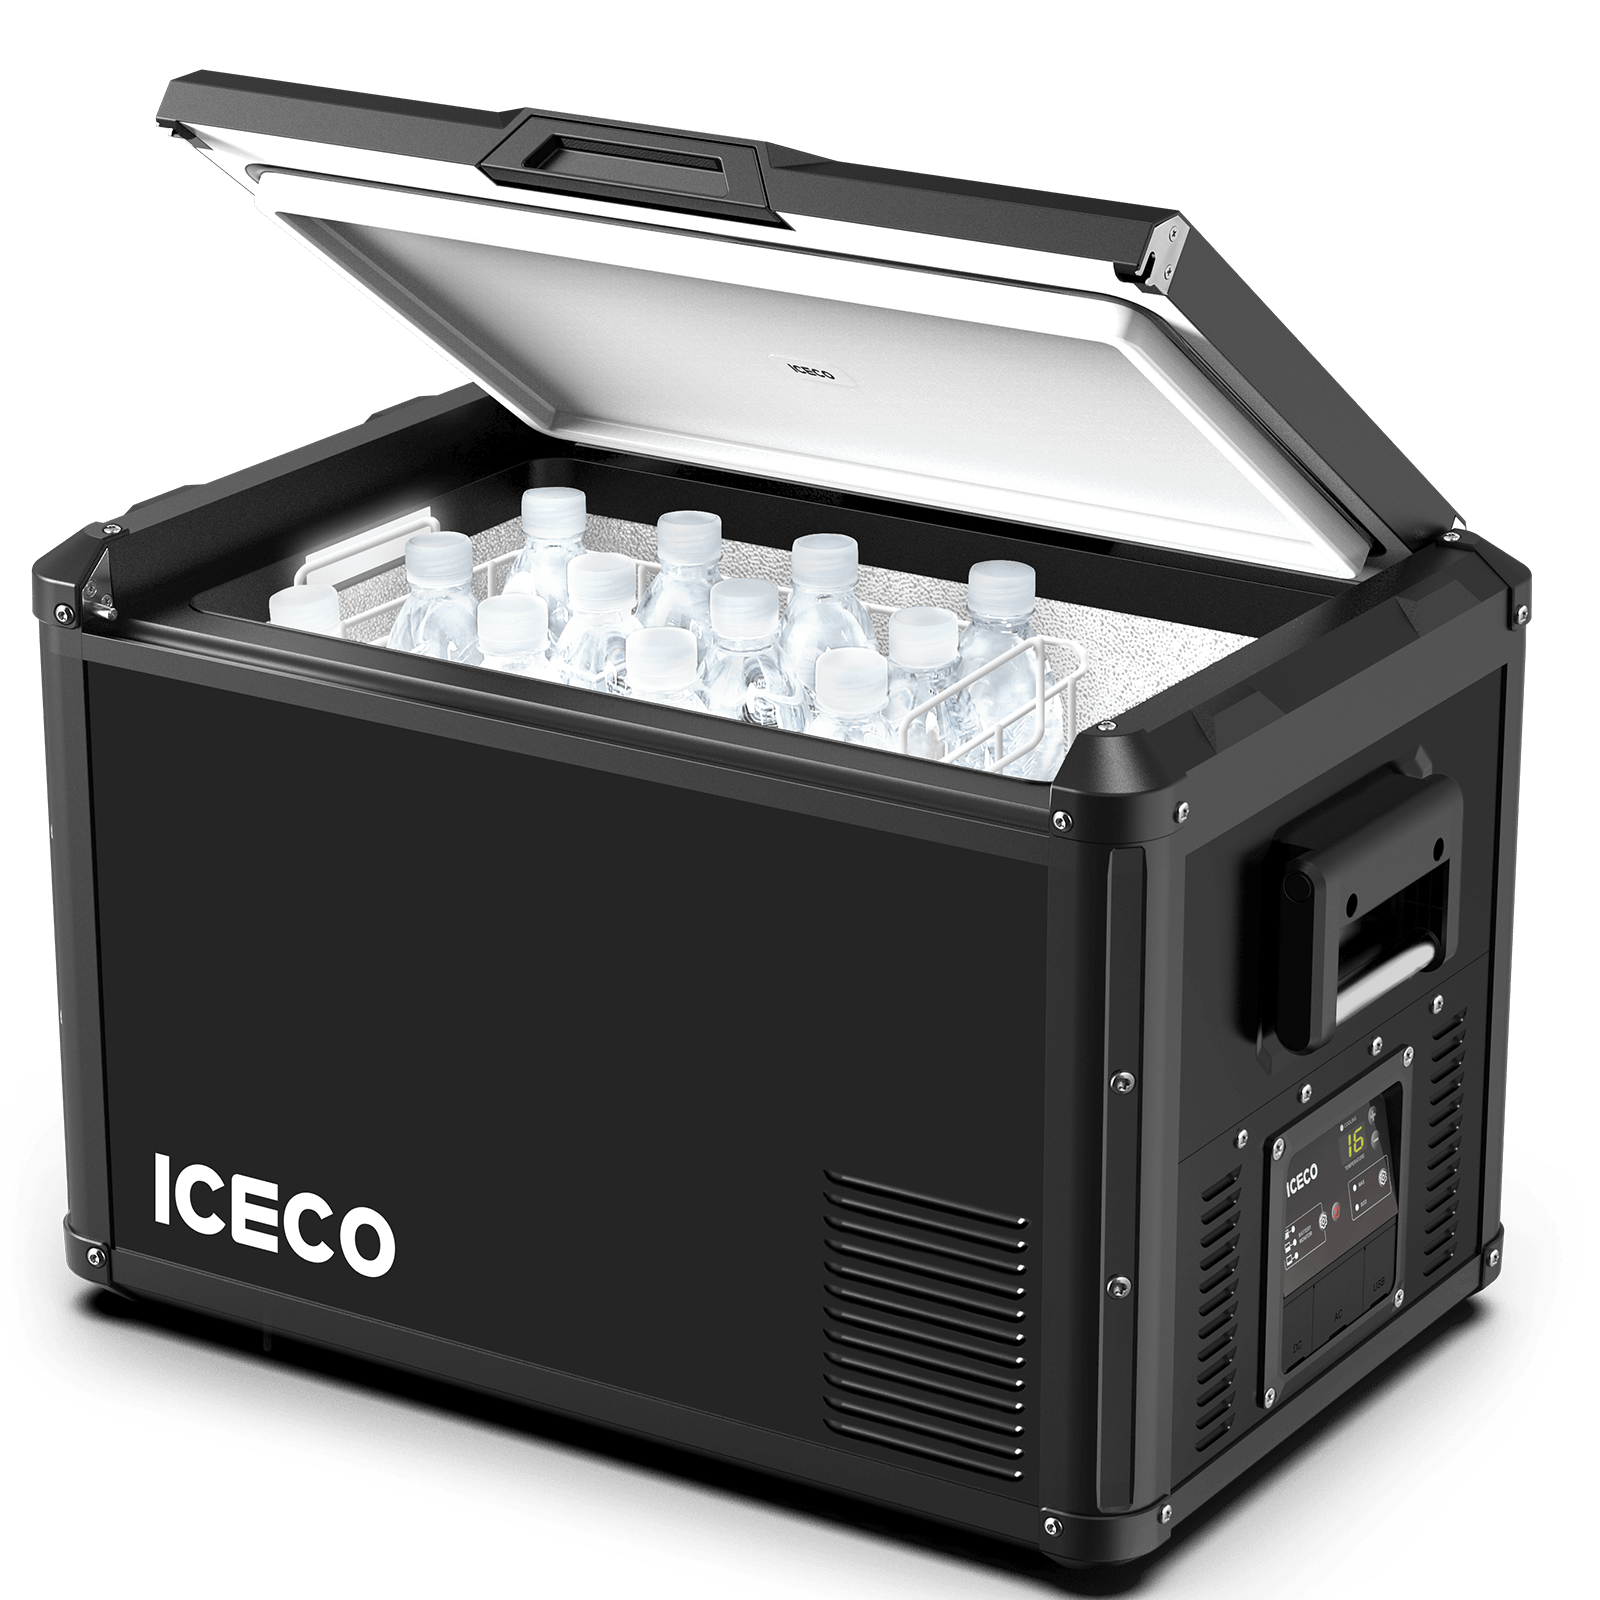 electric cooler、rv 12 volt fridge、cooler that plugs into car、electric ice chest for car、